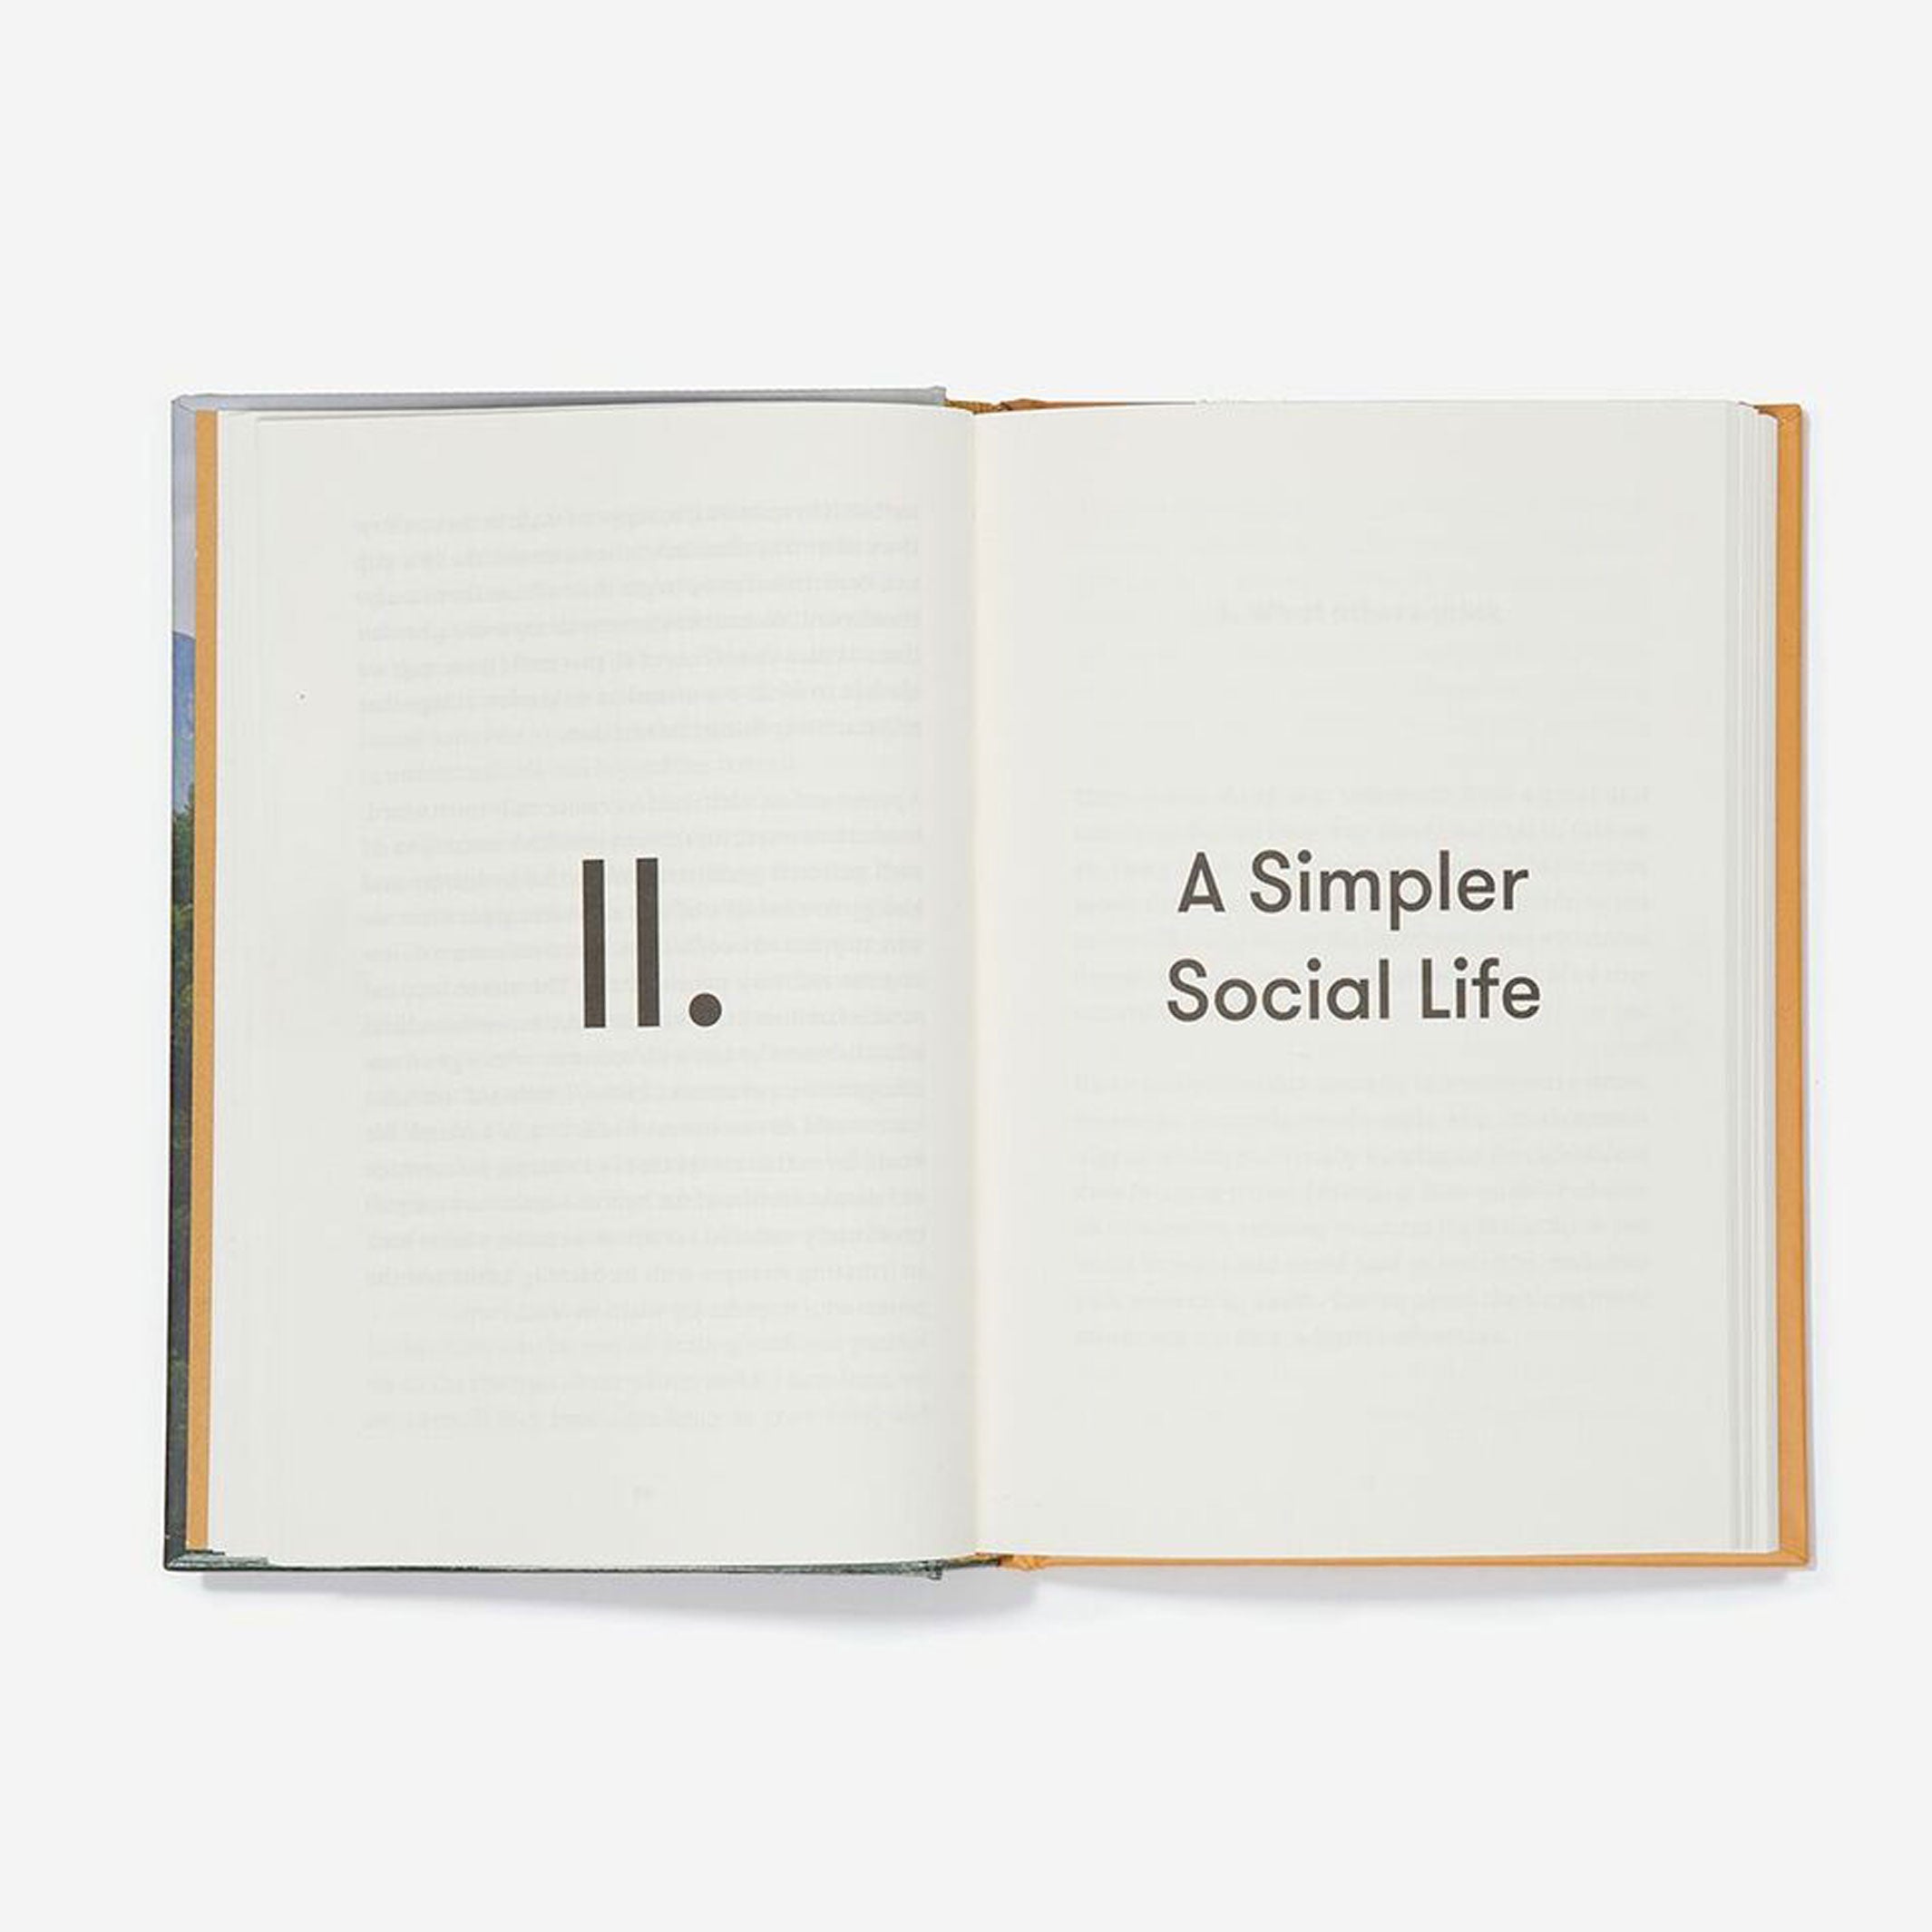 A SIMPLER LIFE | BOOK | English Edition | The School of Life